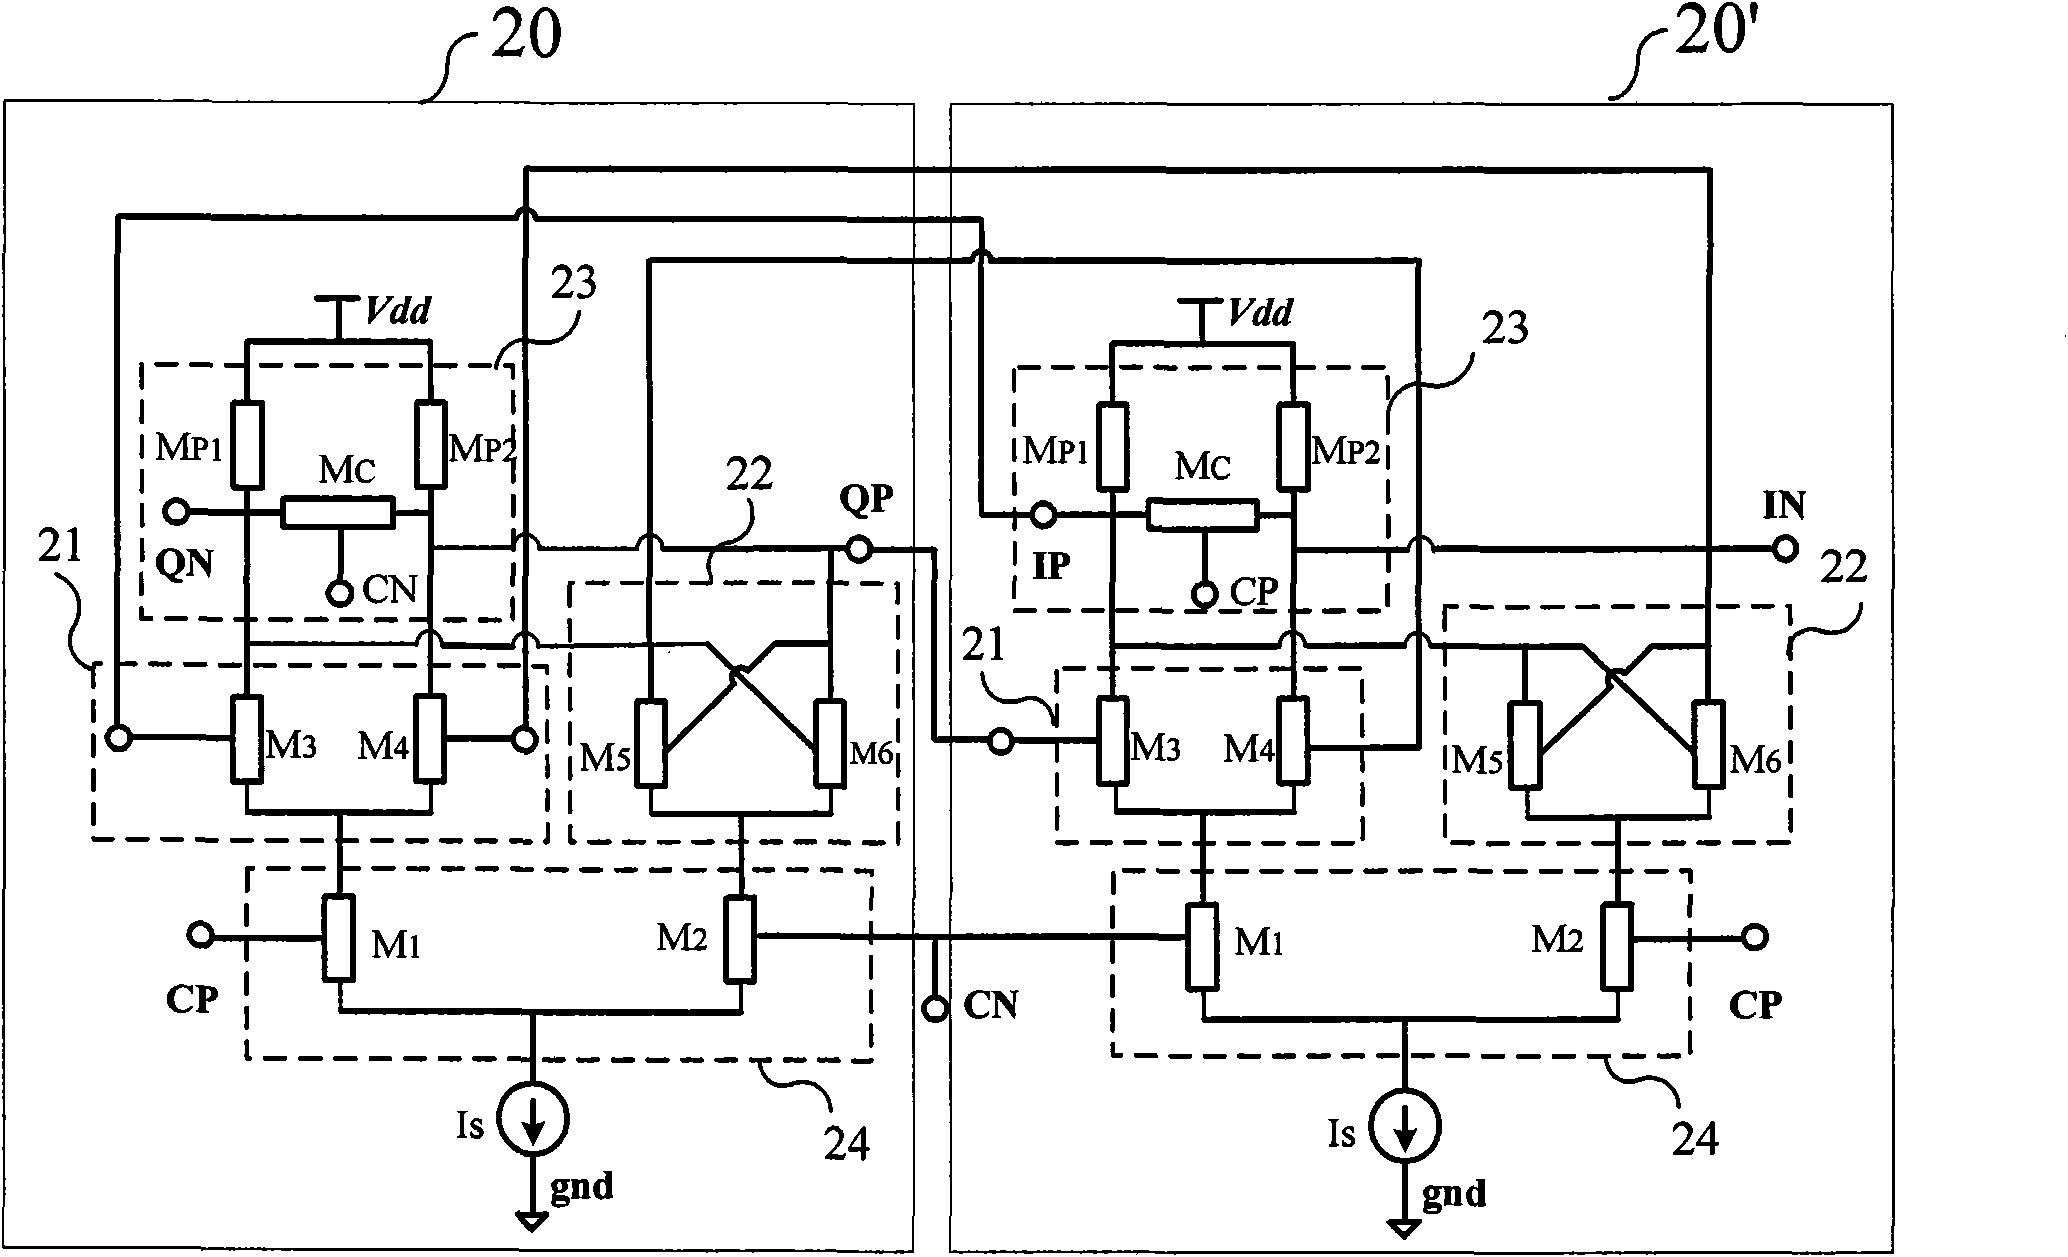 Prescaler with clock-controlled transistor